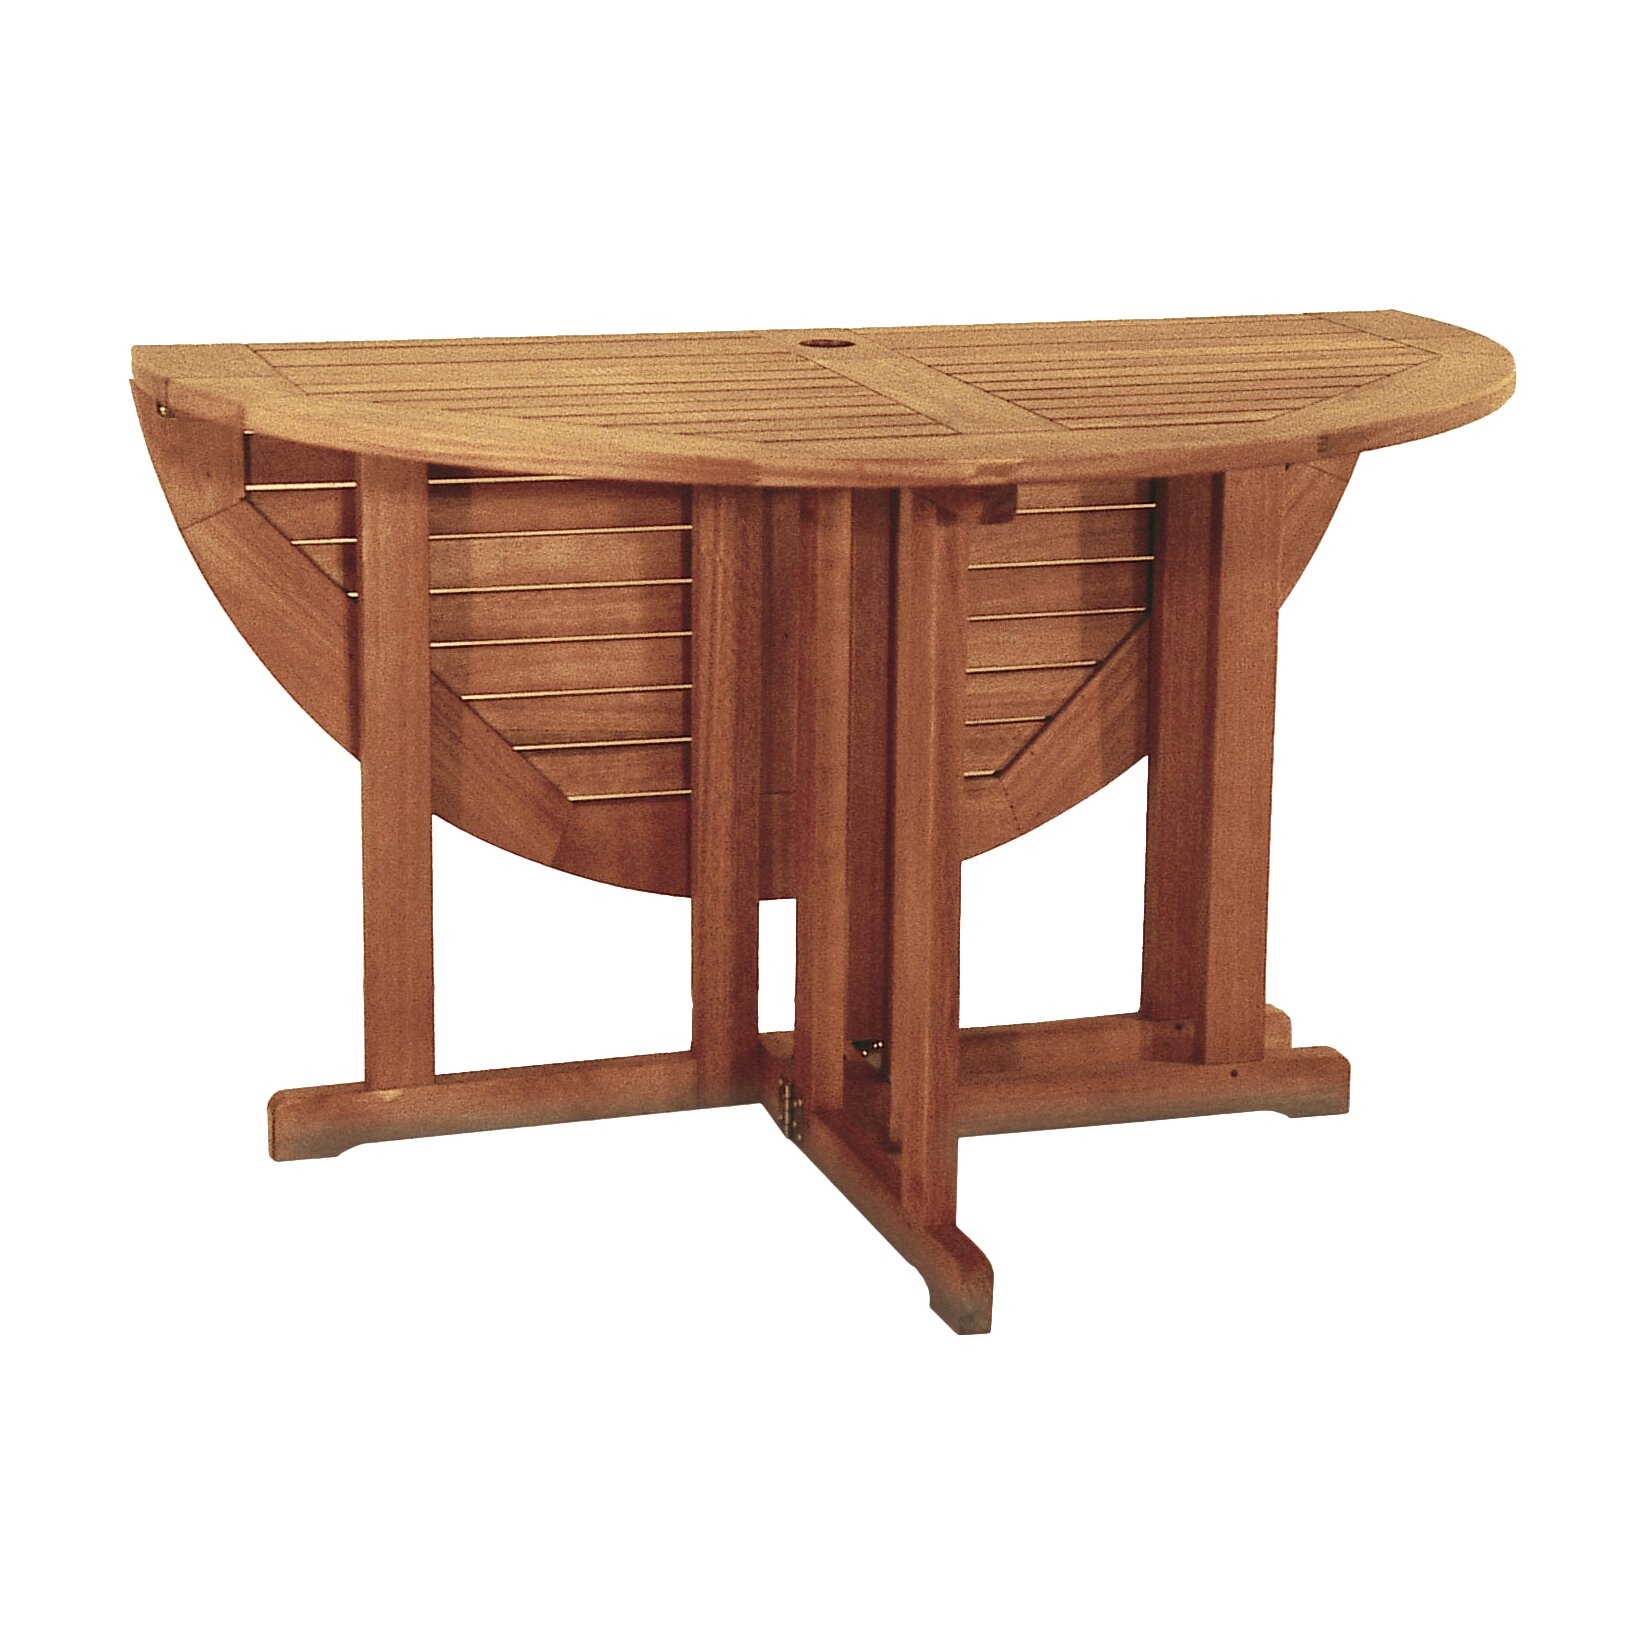 Achla round folding dining table 1